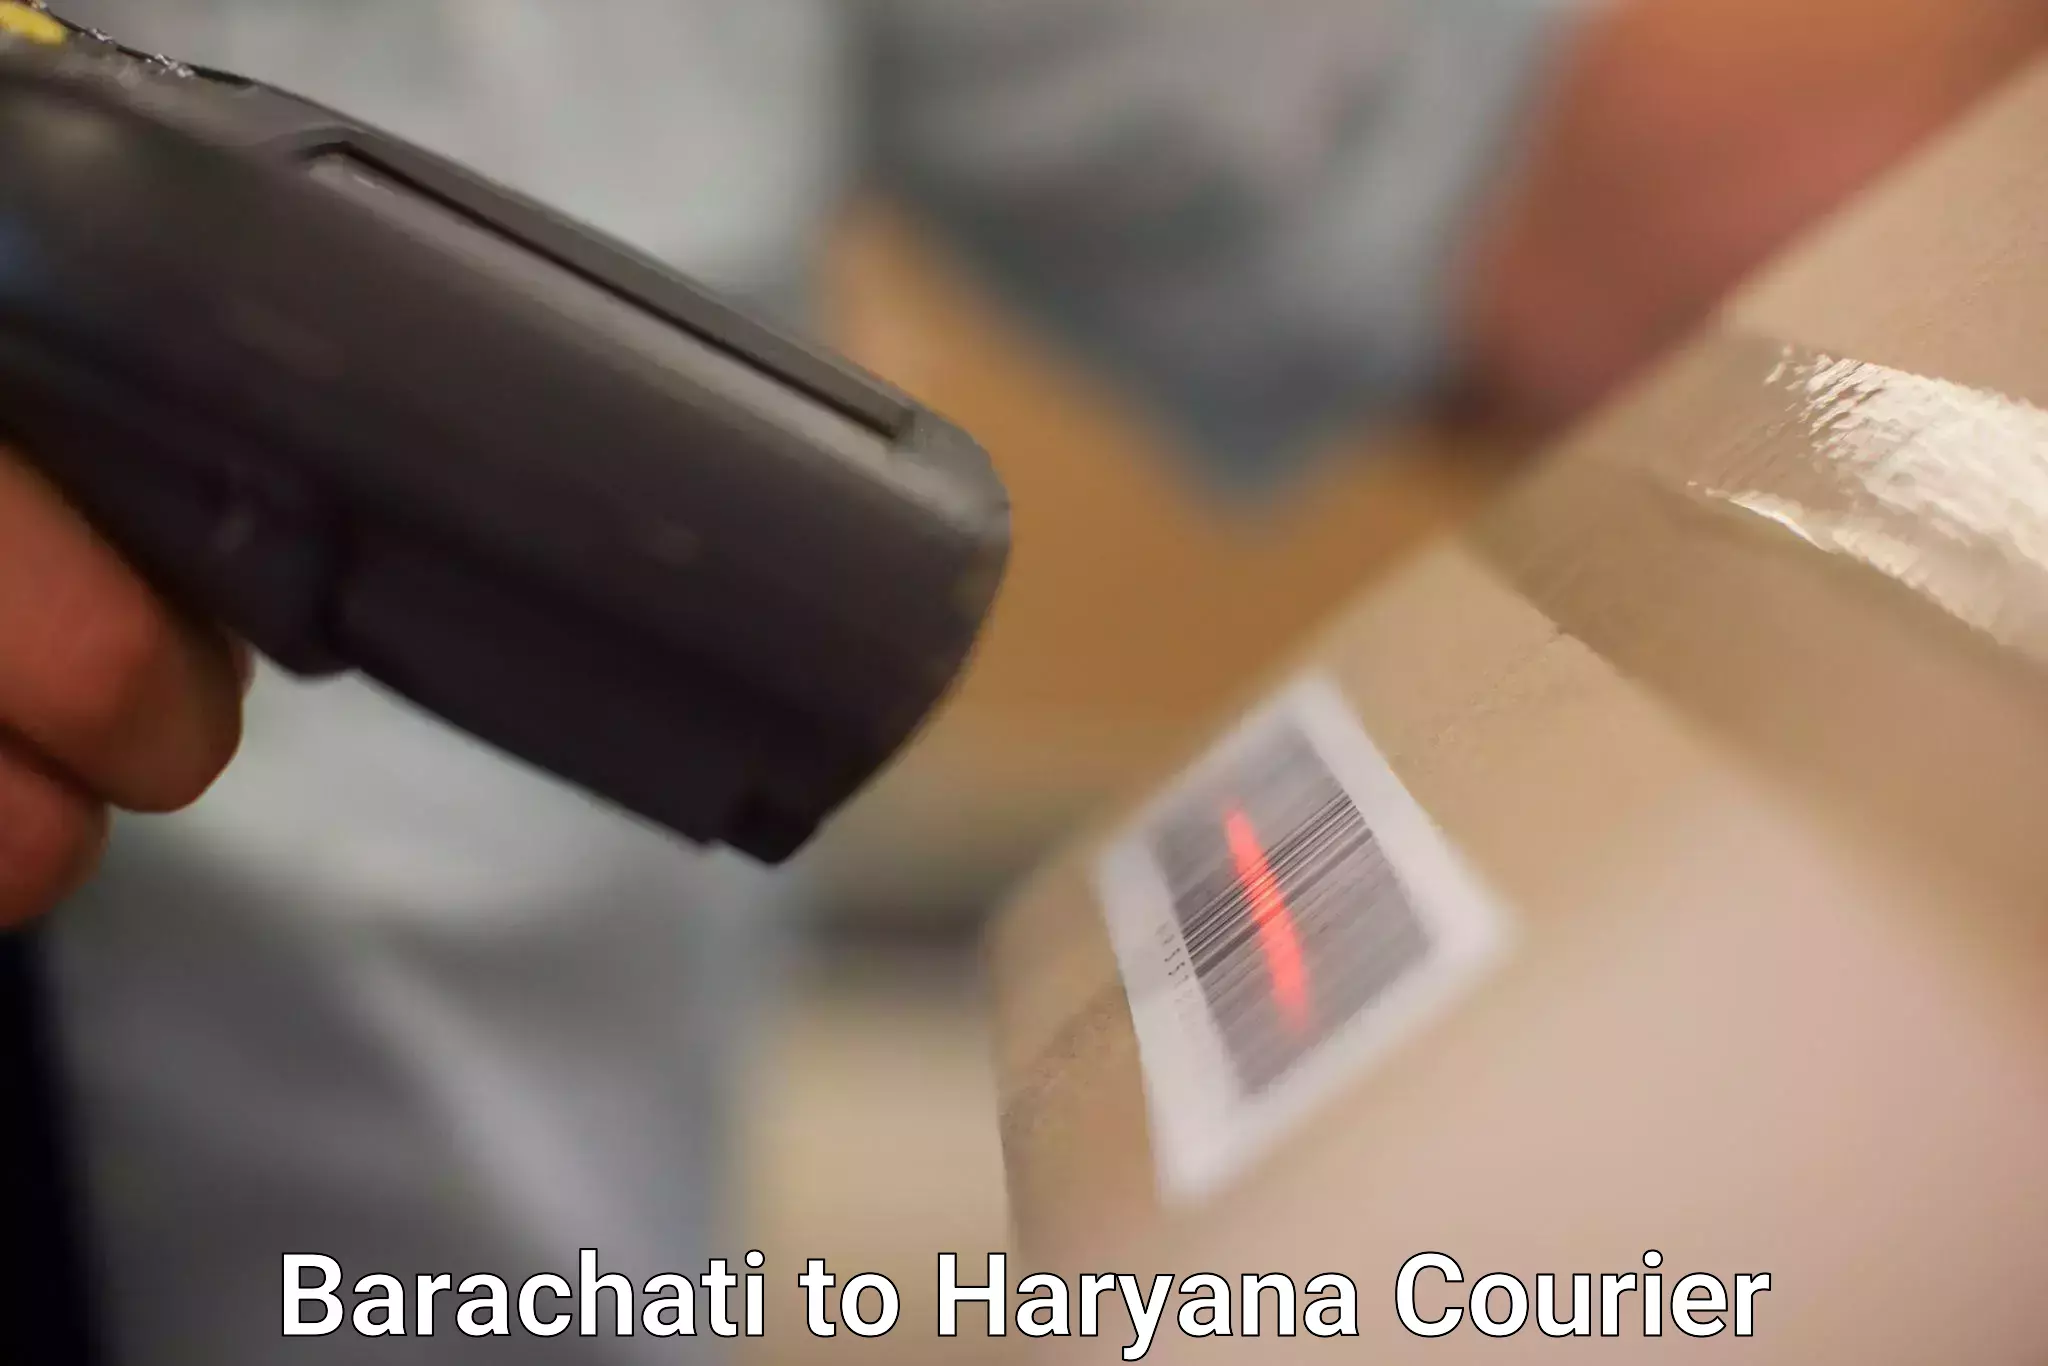 Reliable delivery network Barachati to Haryana